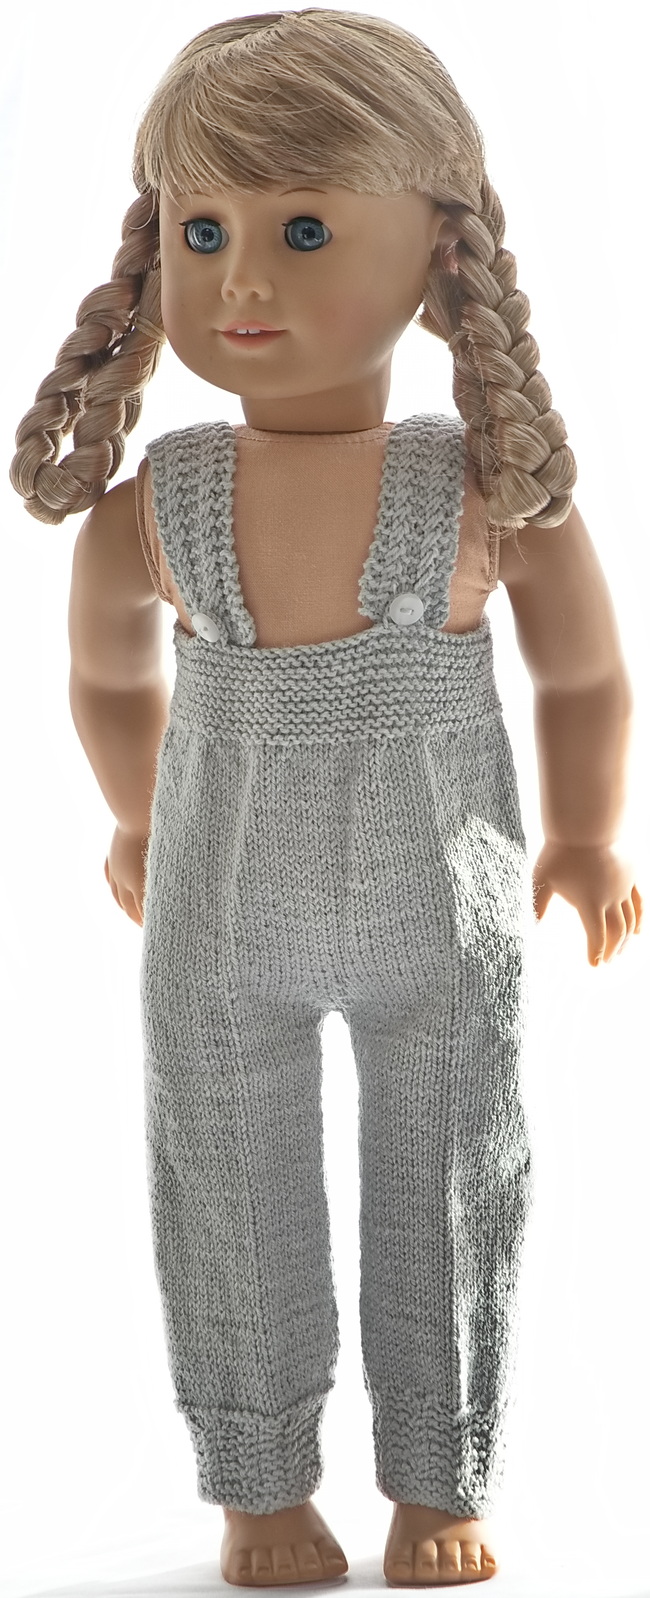 Knitted Doll Clothes: Grey Pants, Yellow and White Accessories